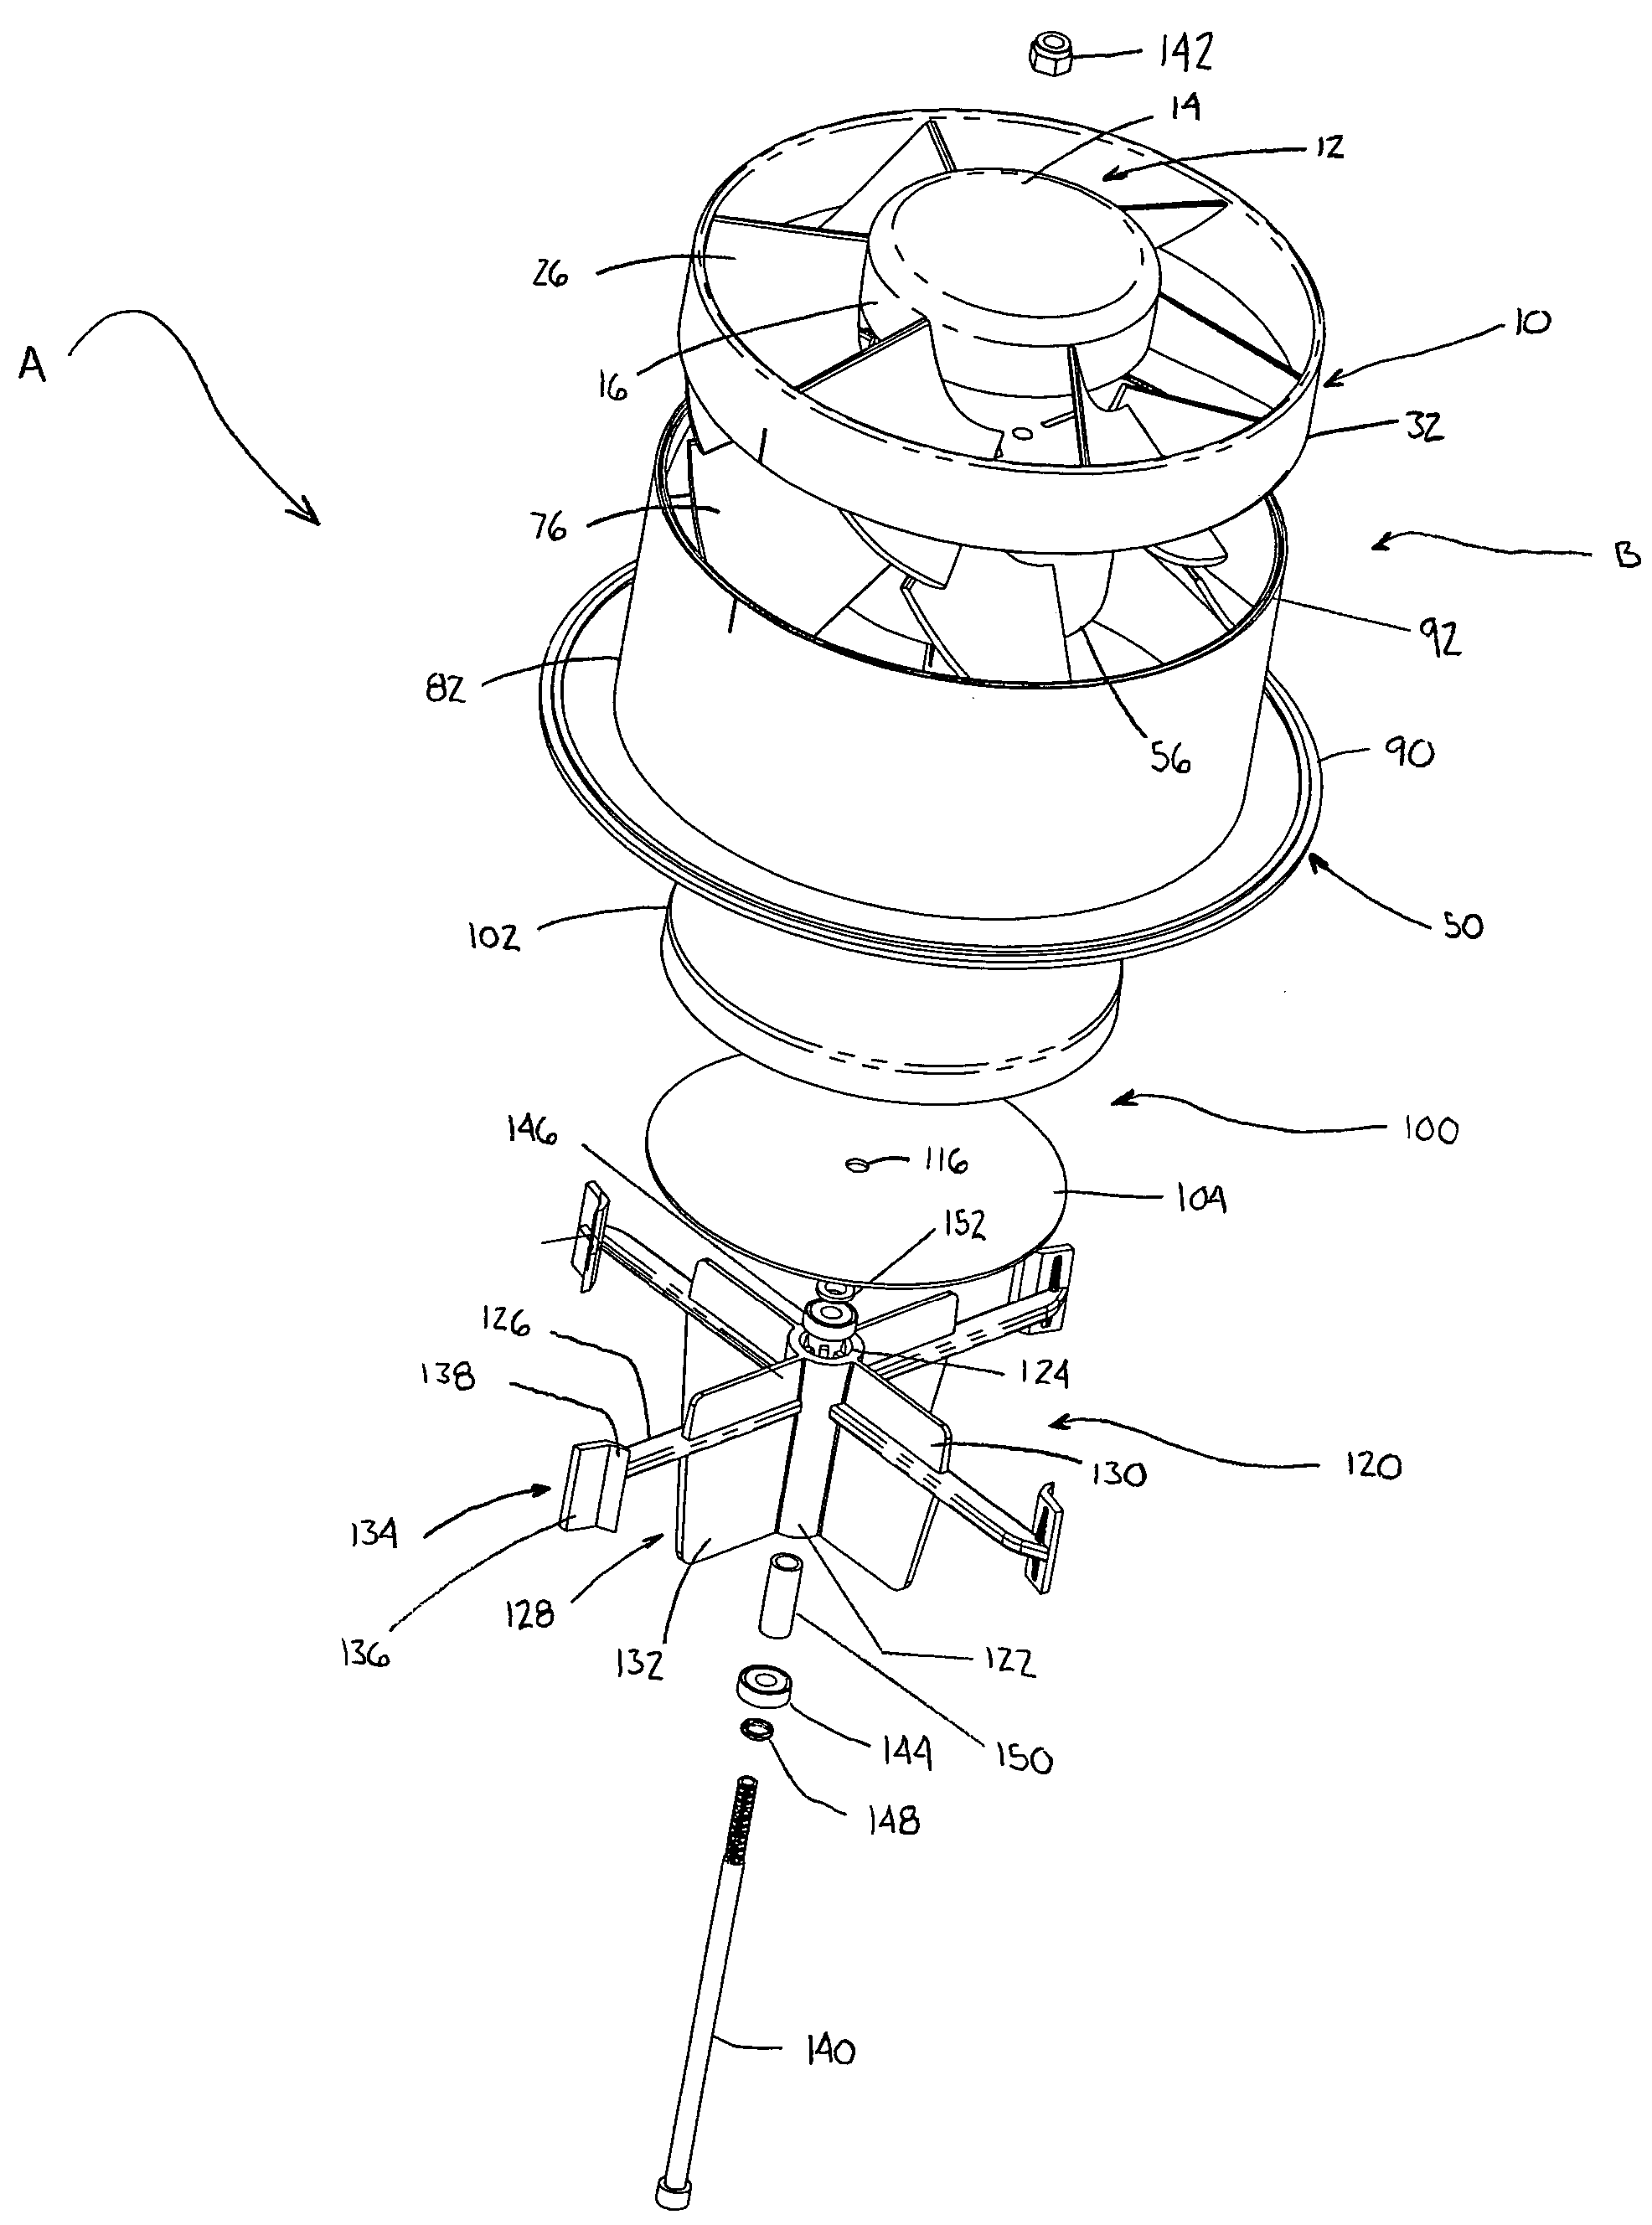 Inlet vane for centrifugal particle separator